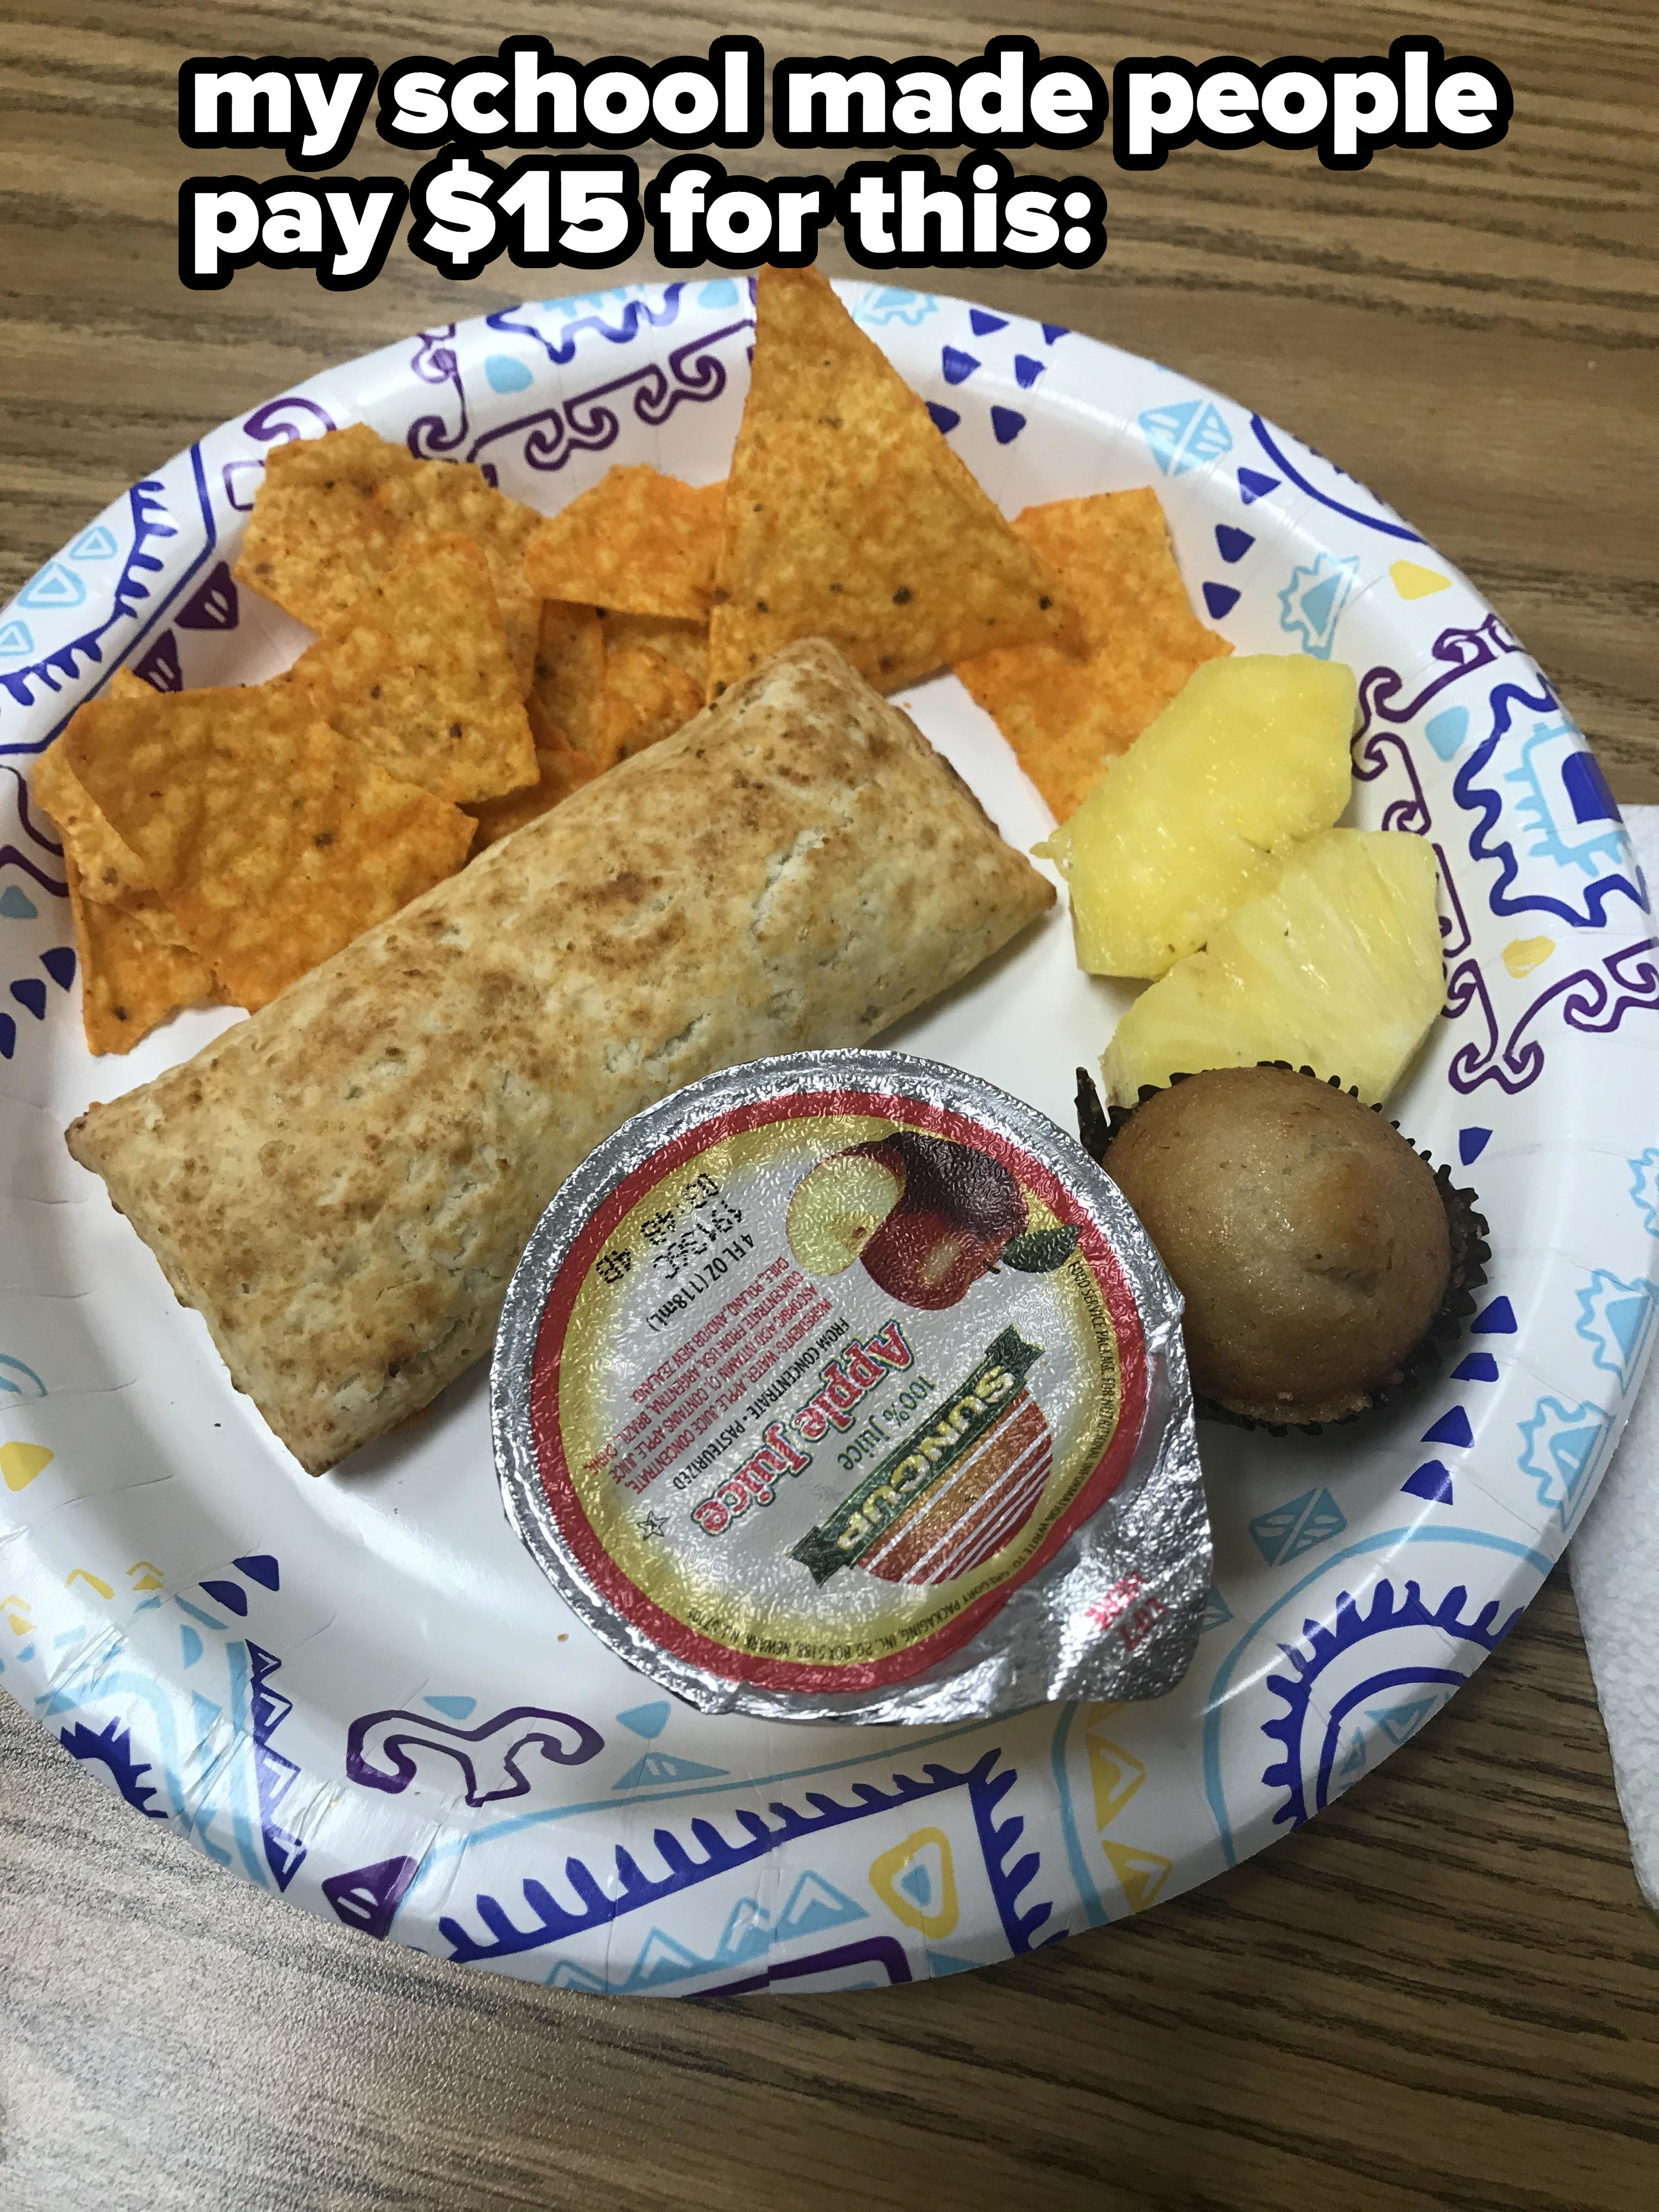 A plate with Doritos, apple sauce, and a Hot Pocket